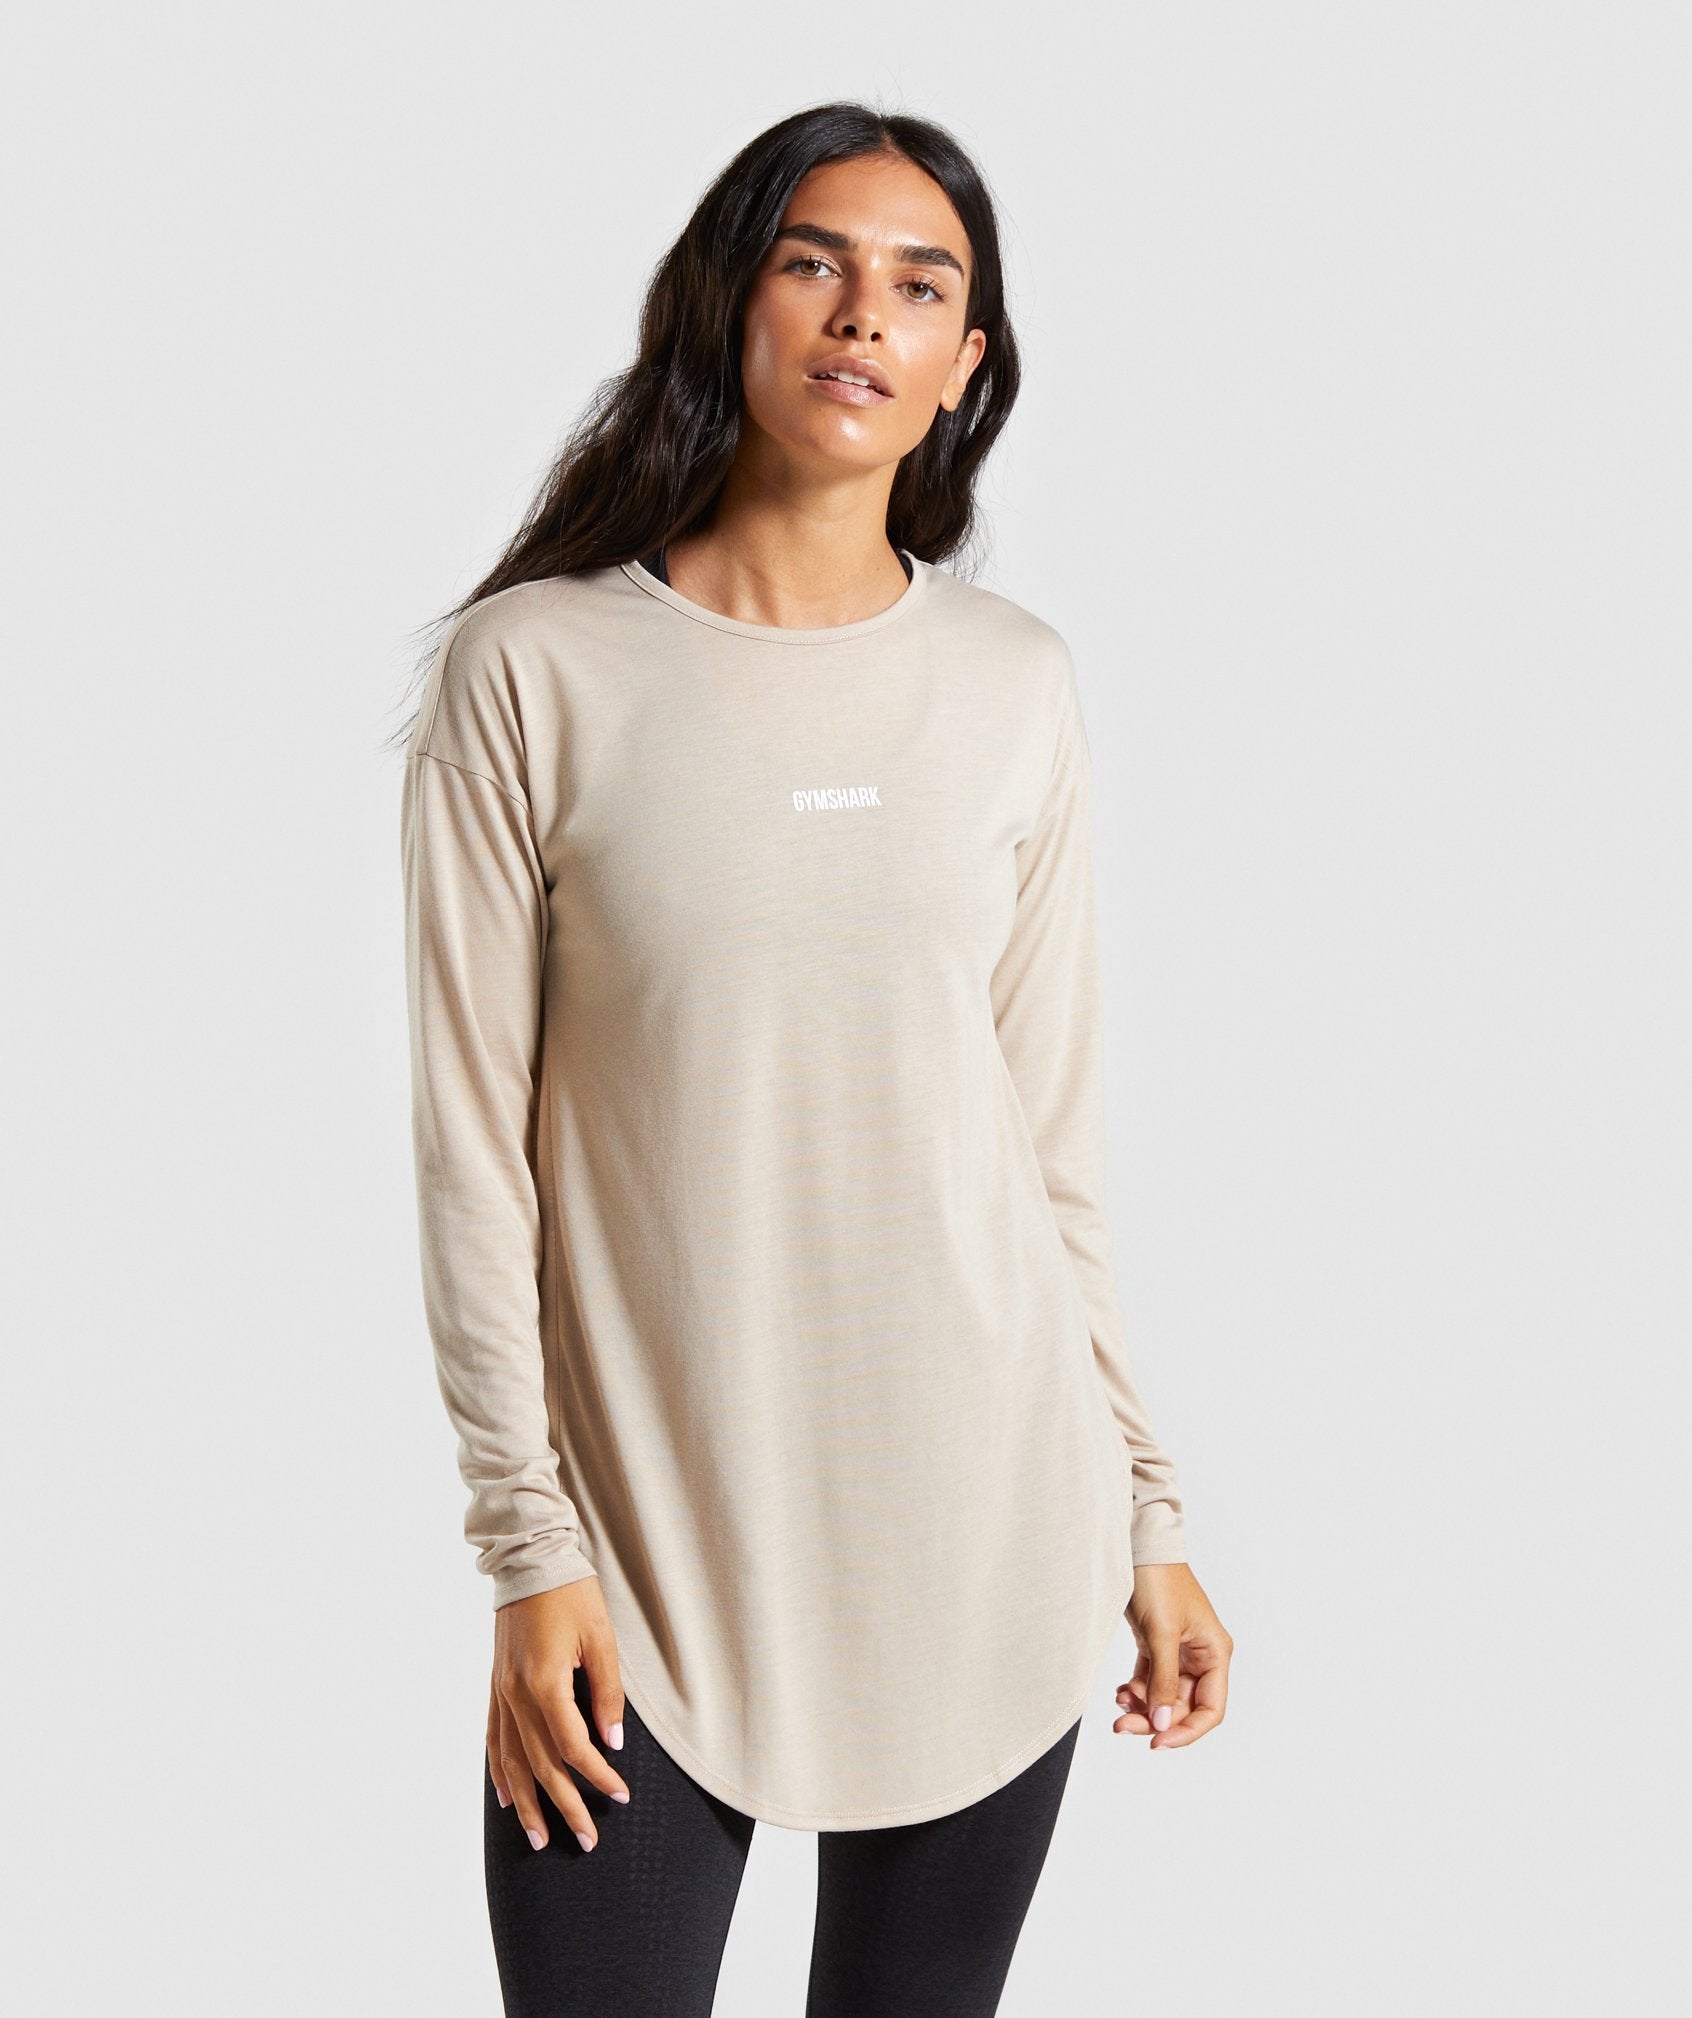 Ark Long Sleeve Top in Sand - view 1